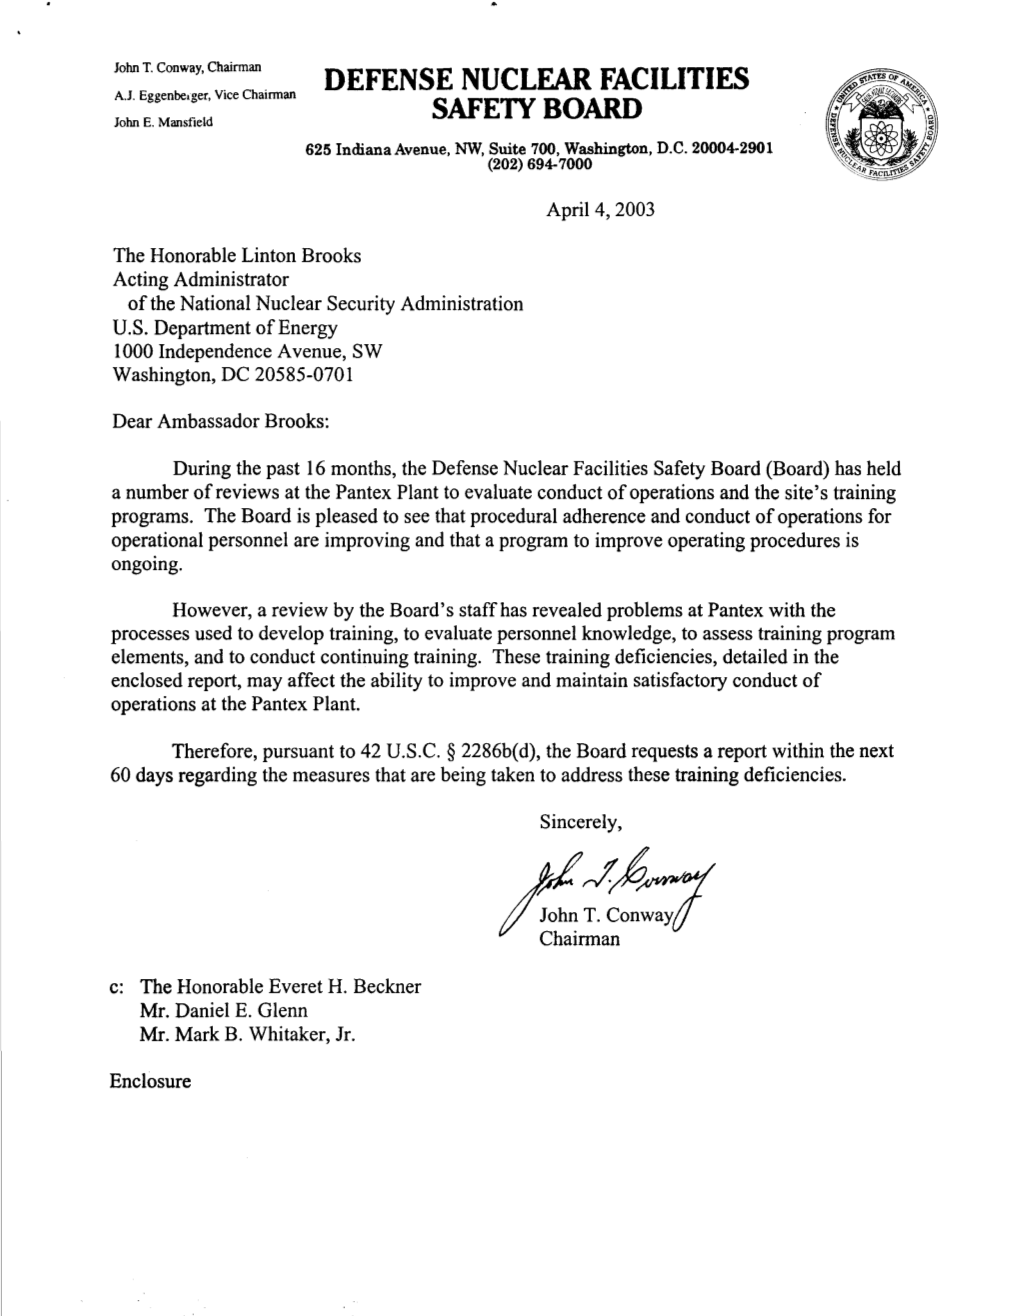 April 4, 2003, Board Letter Establishing a 60-Day Reporting